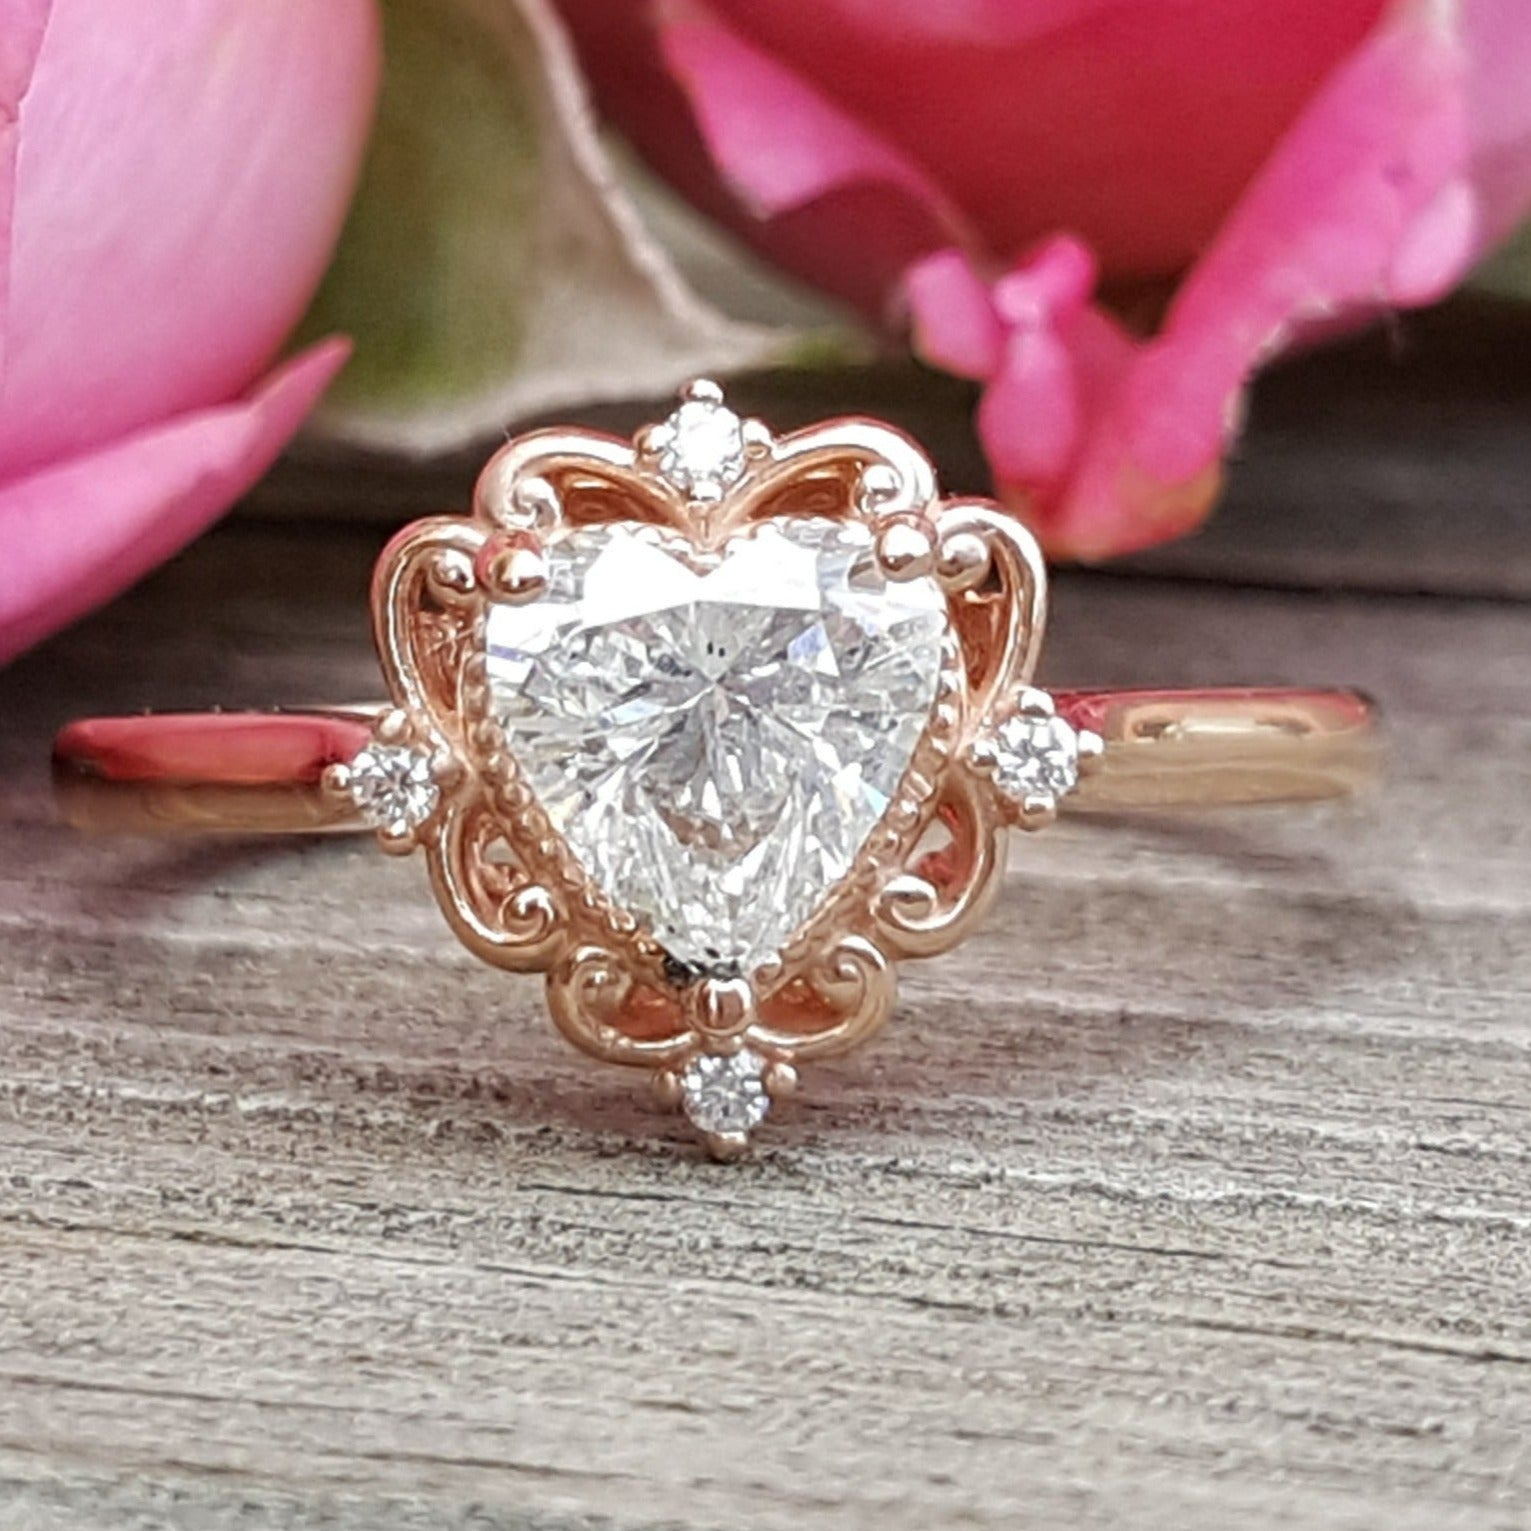 Large Heart Shaped Diamond Solitaire Engagement Ring 18K Gold 3.01ct M/I2  GIA